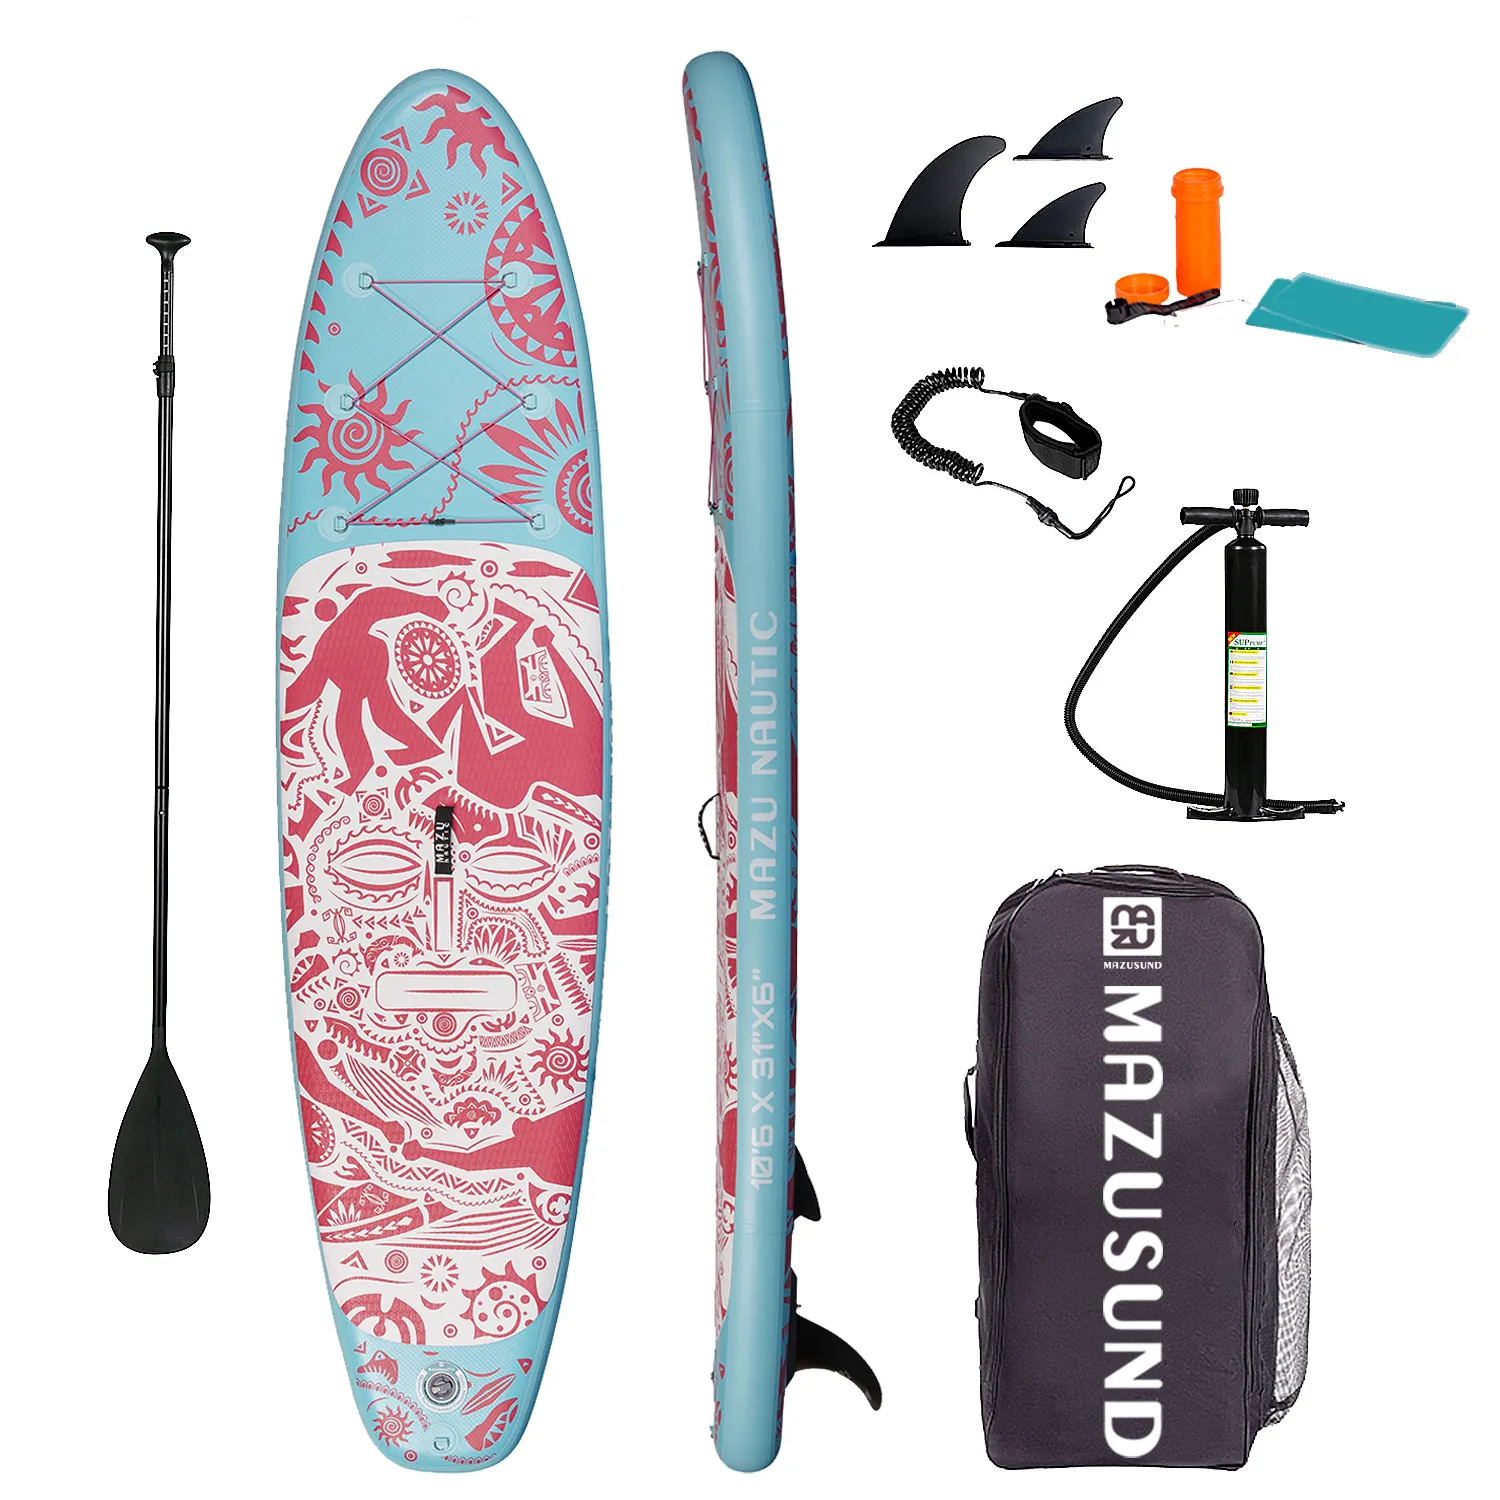 Reachsea New Style Stand-Up Paddleboarding Inflatable SUP Board Inflatable Surfing Board for Water Sports